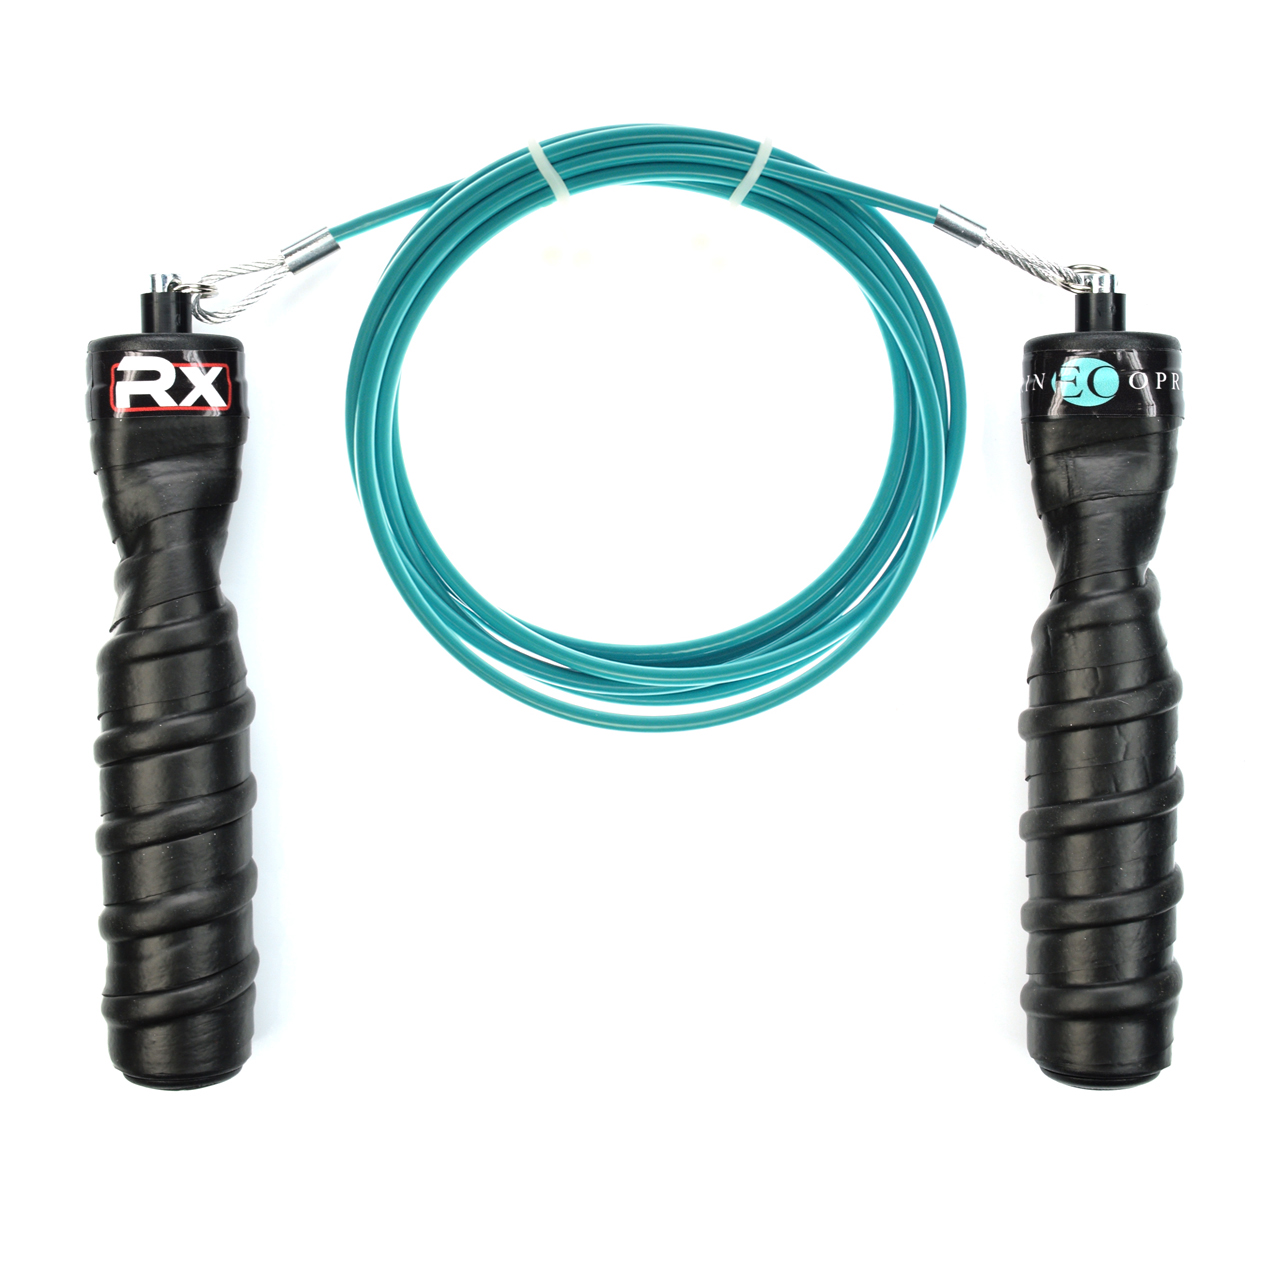 Frevo Rx Jump Rope  Best Rope for Double Under Crossovers